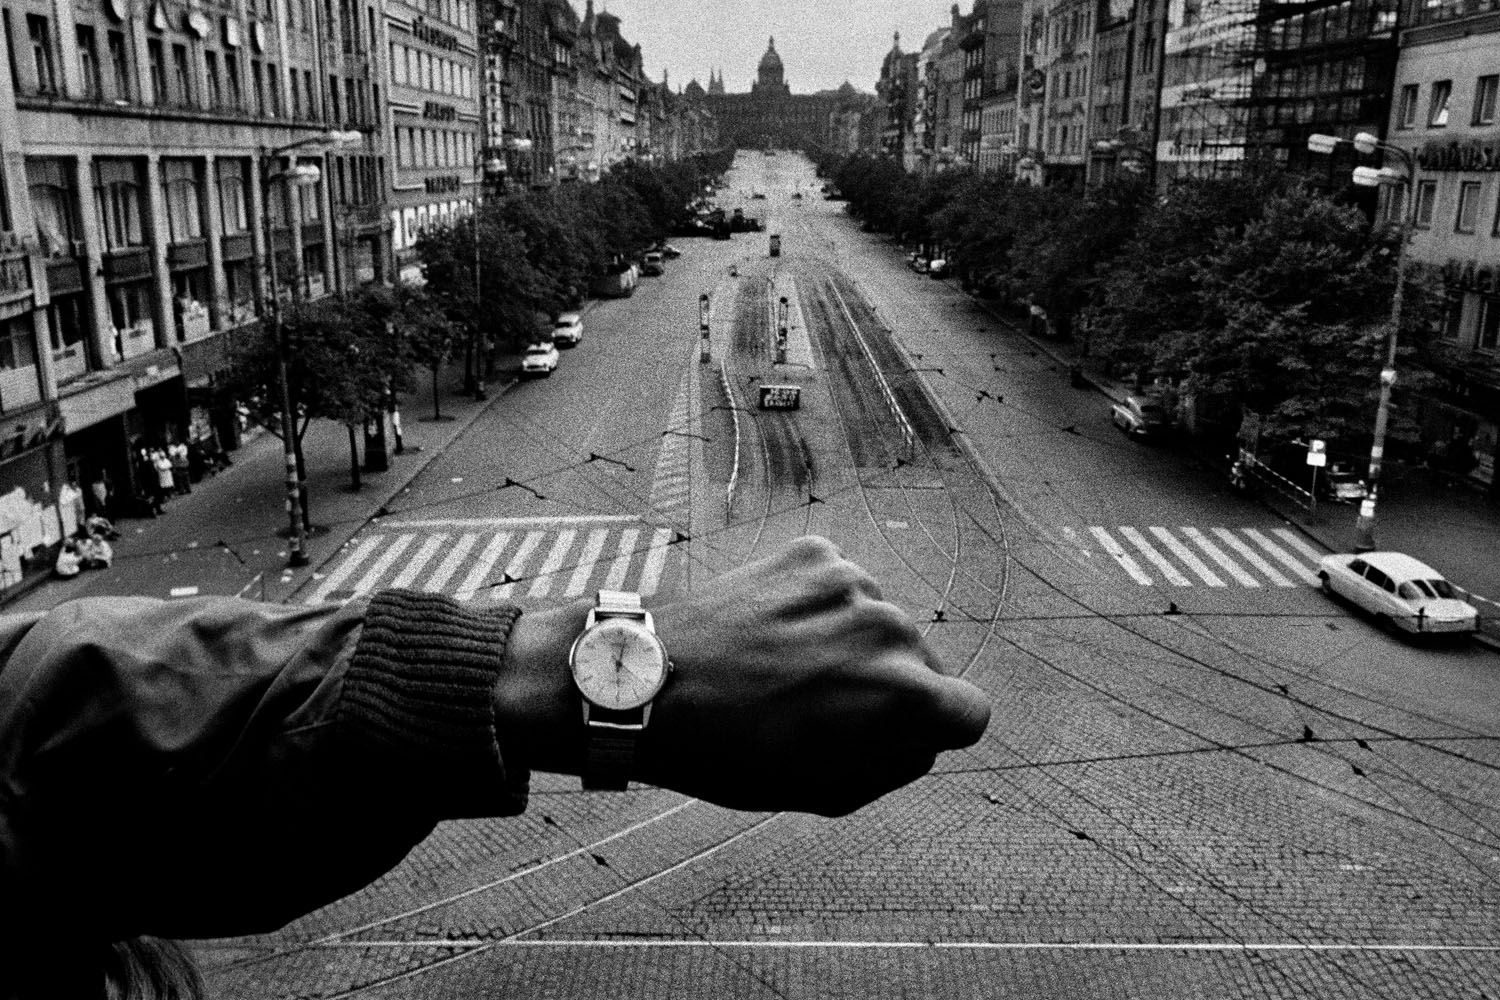 ¬© Josef Koudelka/Magnum Photos. CZECHOSLOVAKIA. Prague. August 1968. Warsaw Pact troops invade Prague. In front of the Radio Headquarters. Contact email New York: photography@magnumphotos.comFrom the Invasion 68 Prague project.